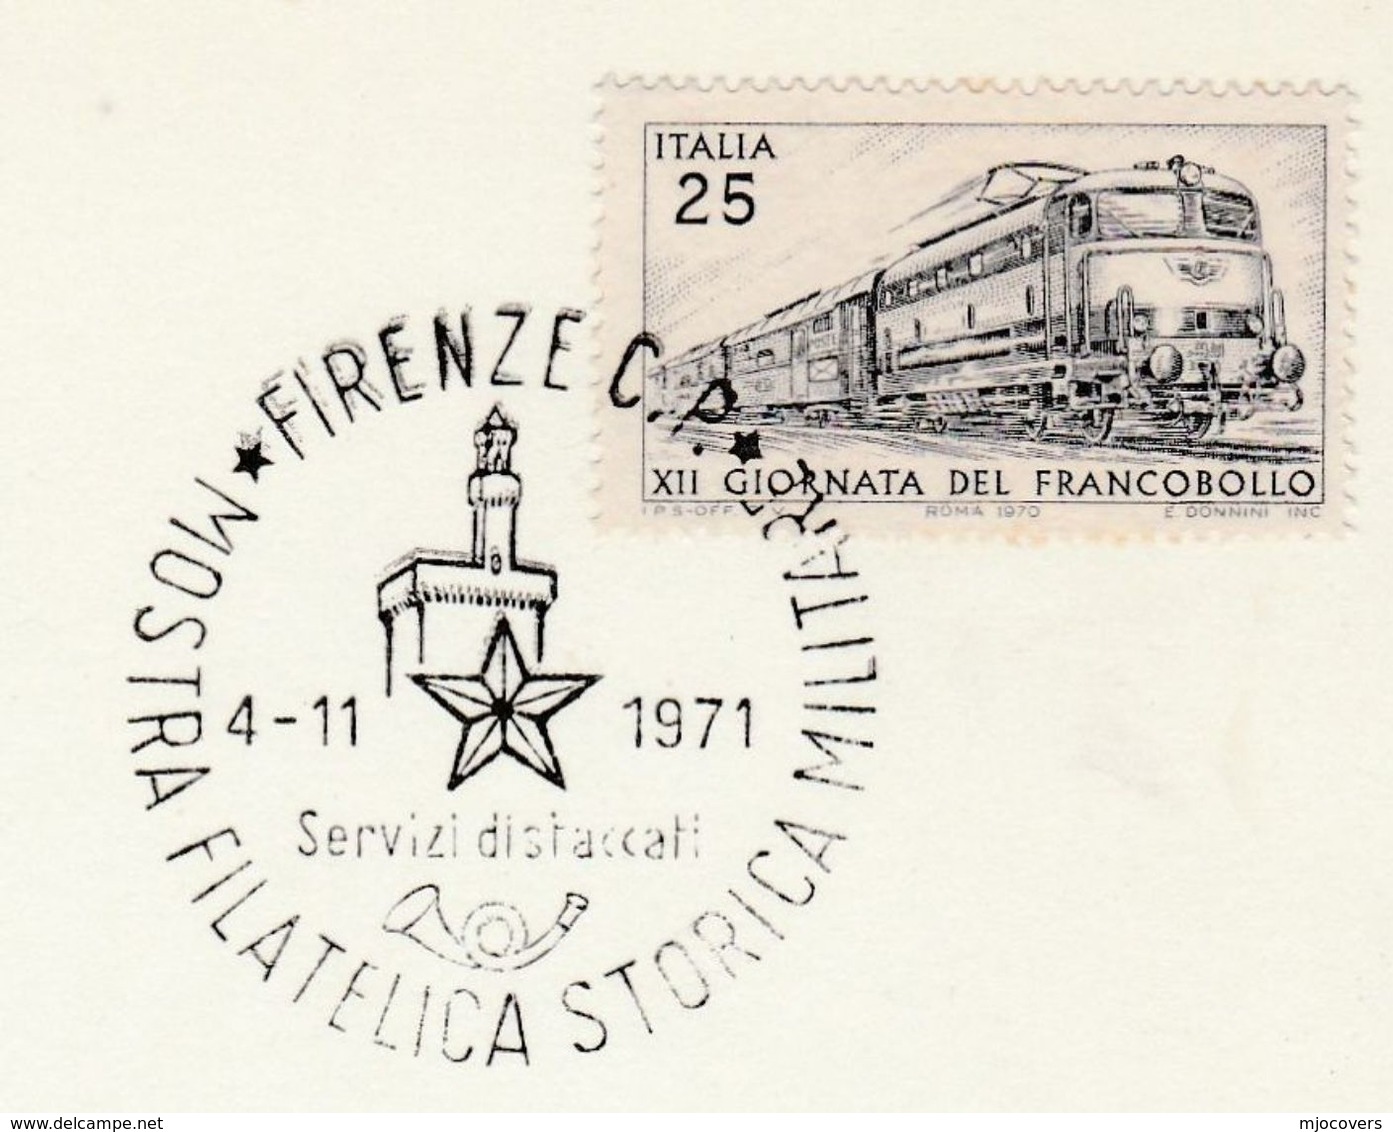 1971 Firenze MILITARY HISTORY EXHIBITION  EVENT COVER Card Italy Stamps Railway Train - Militaria